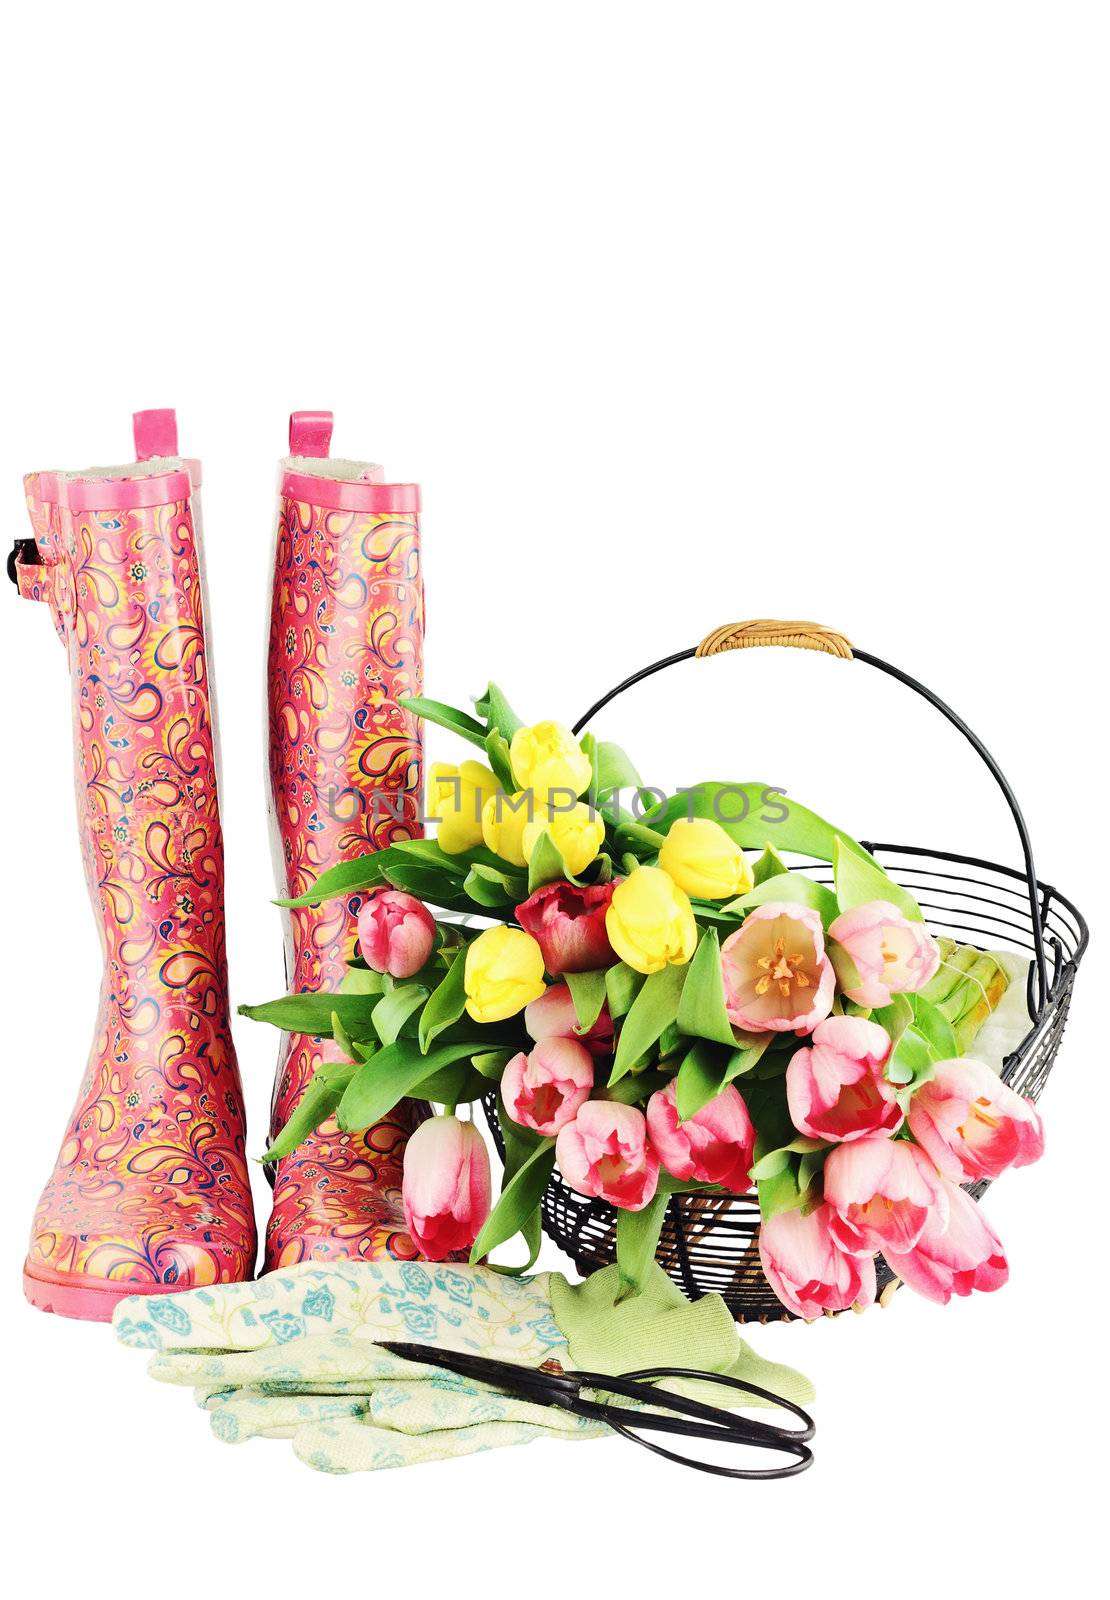 Fresh cut tulips with galoshes, gardening gloves and sheers isolated on a white background with copyspace available.